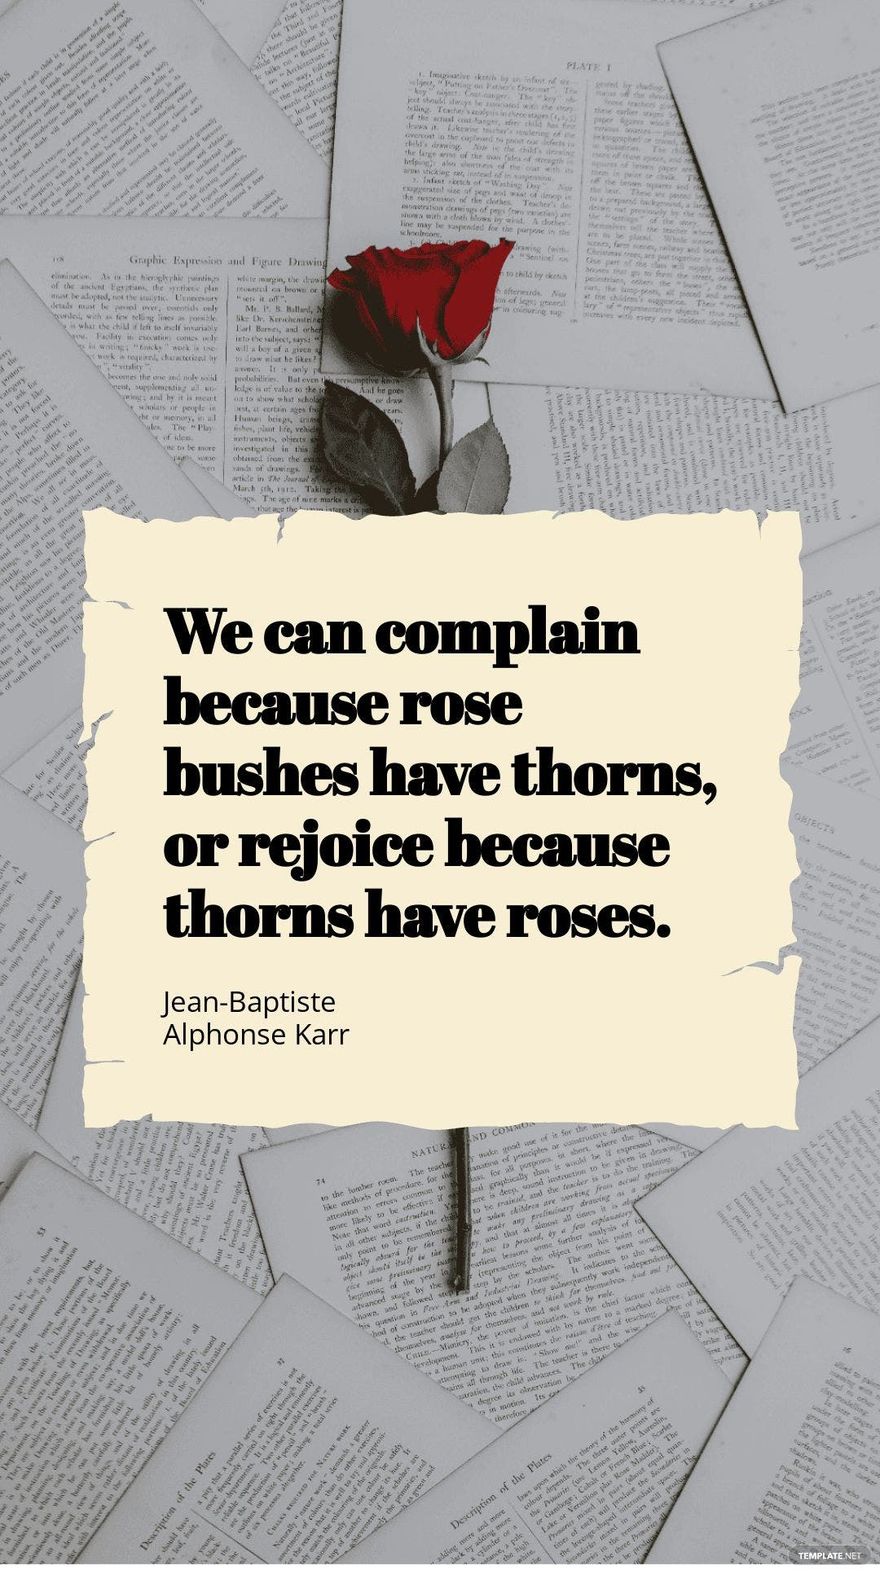 Jean-Baptiste Alphonse Karr - We can complain because rose bushes have thorns, or rejoice because thorns have roses.